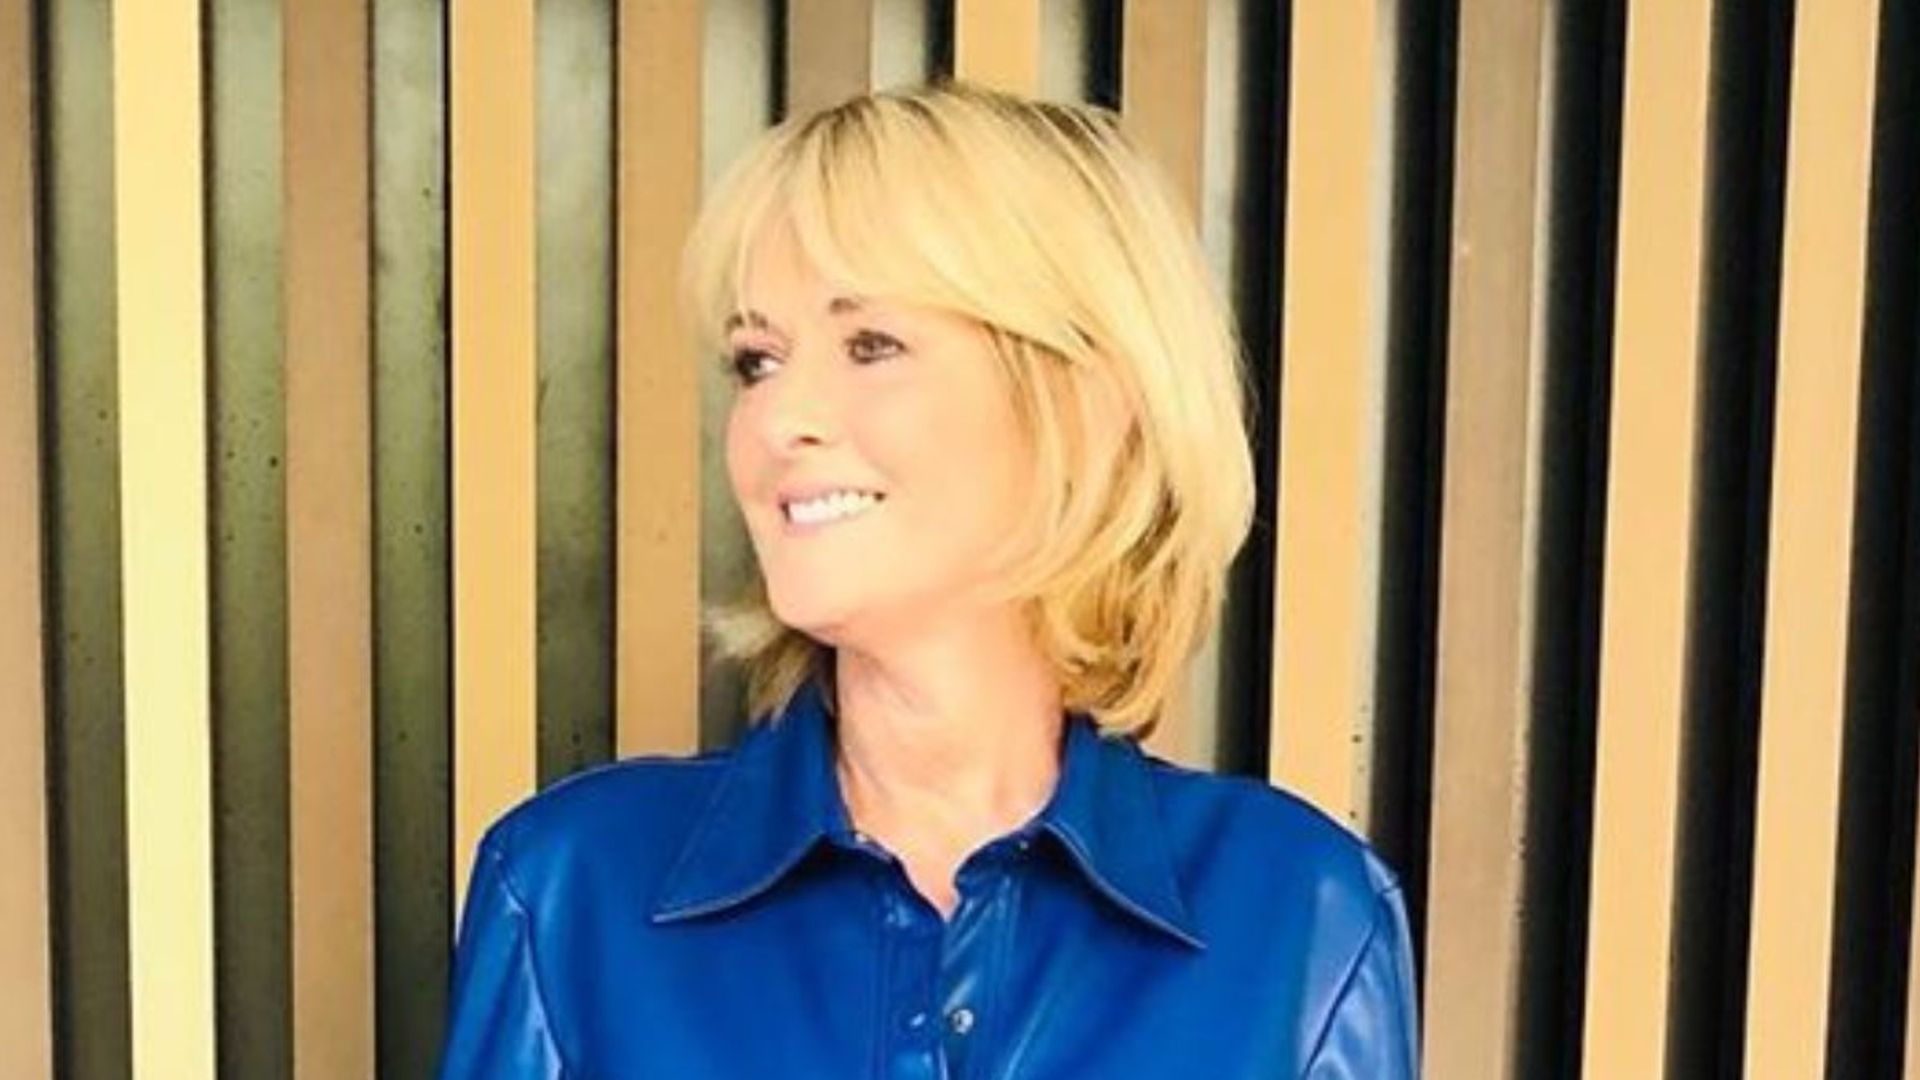 Jane Moore surprises fans in a daring faux leather dress from Zara